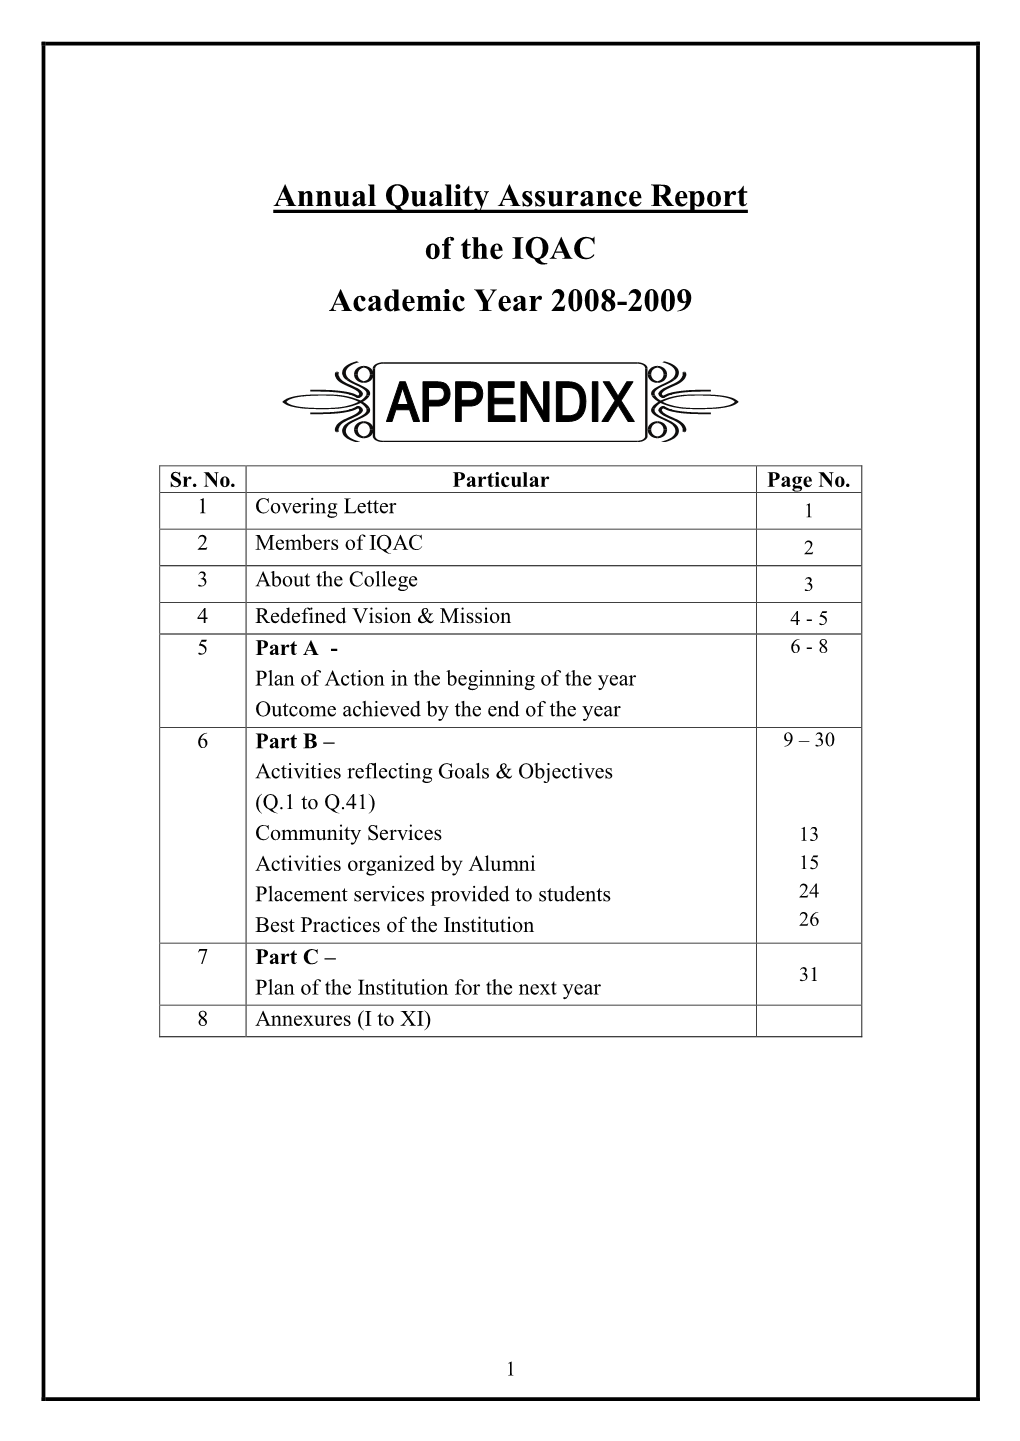 Annual Quality Assurance Report of the IQAC 2008-09